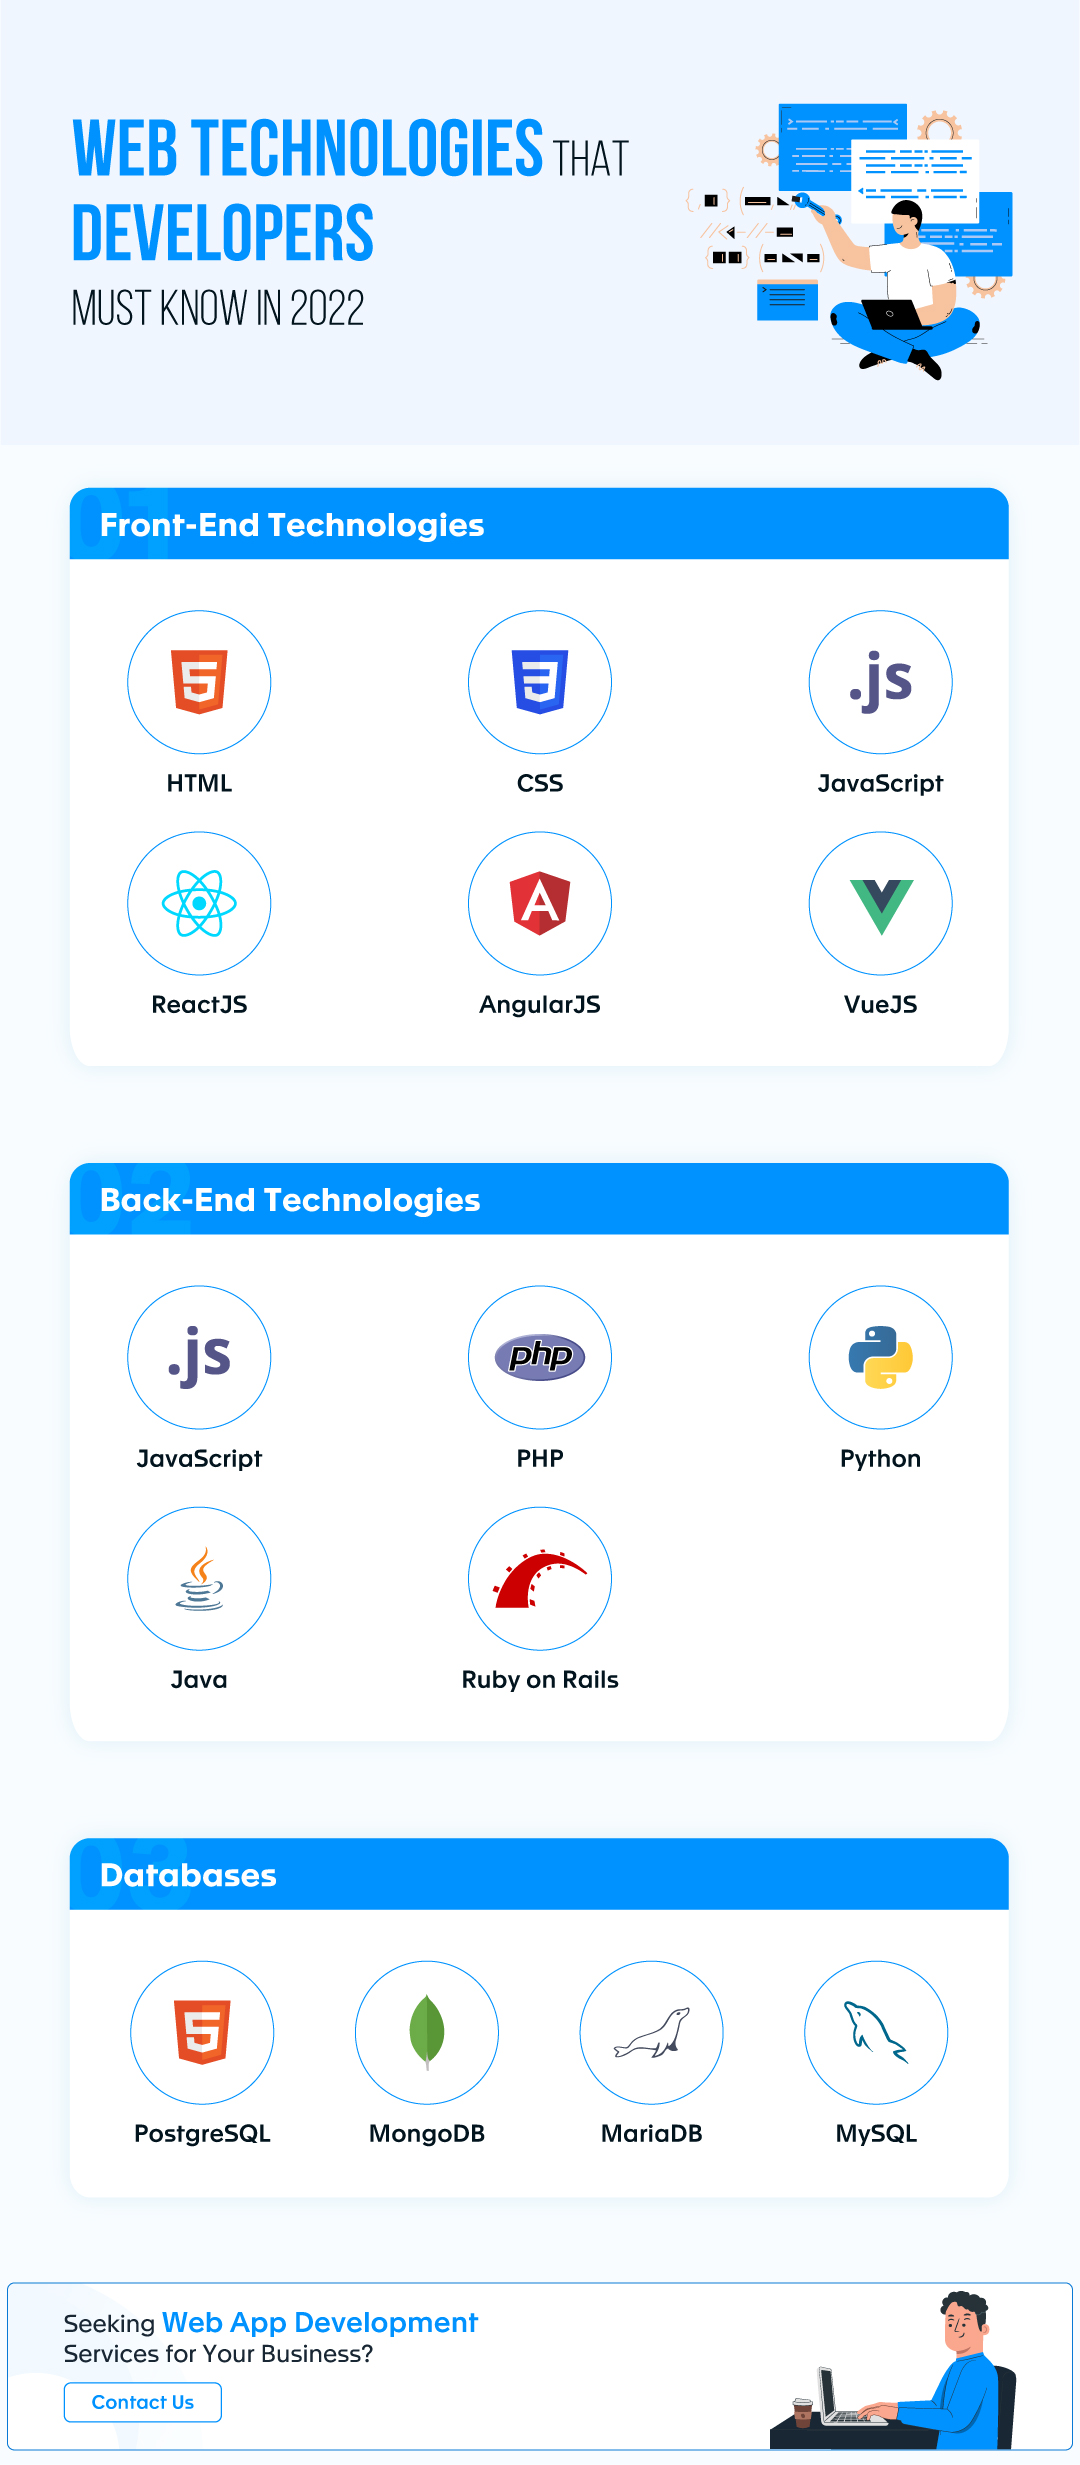 Web Technologies - WEB TECHNOLOGIES 1 =
DEVELOPERS wo gl
MUST KNOW IN 2022 . -

8 8 i

 

HTML CSS JavaScript
ReactlS Angularls VuelS

Back-End Technologies

js PY a

JavaScript PHP Python
\ / \
\ - / AN /
Java Ruby on Rails

Databases

7 >
EB ) A AN

PostgreSQL MongoDB MariaDB MySQL

 

Seeking Web App Development ~

Services for Your Business? =
| contacts | a) <U)